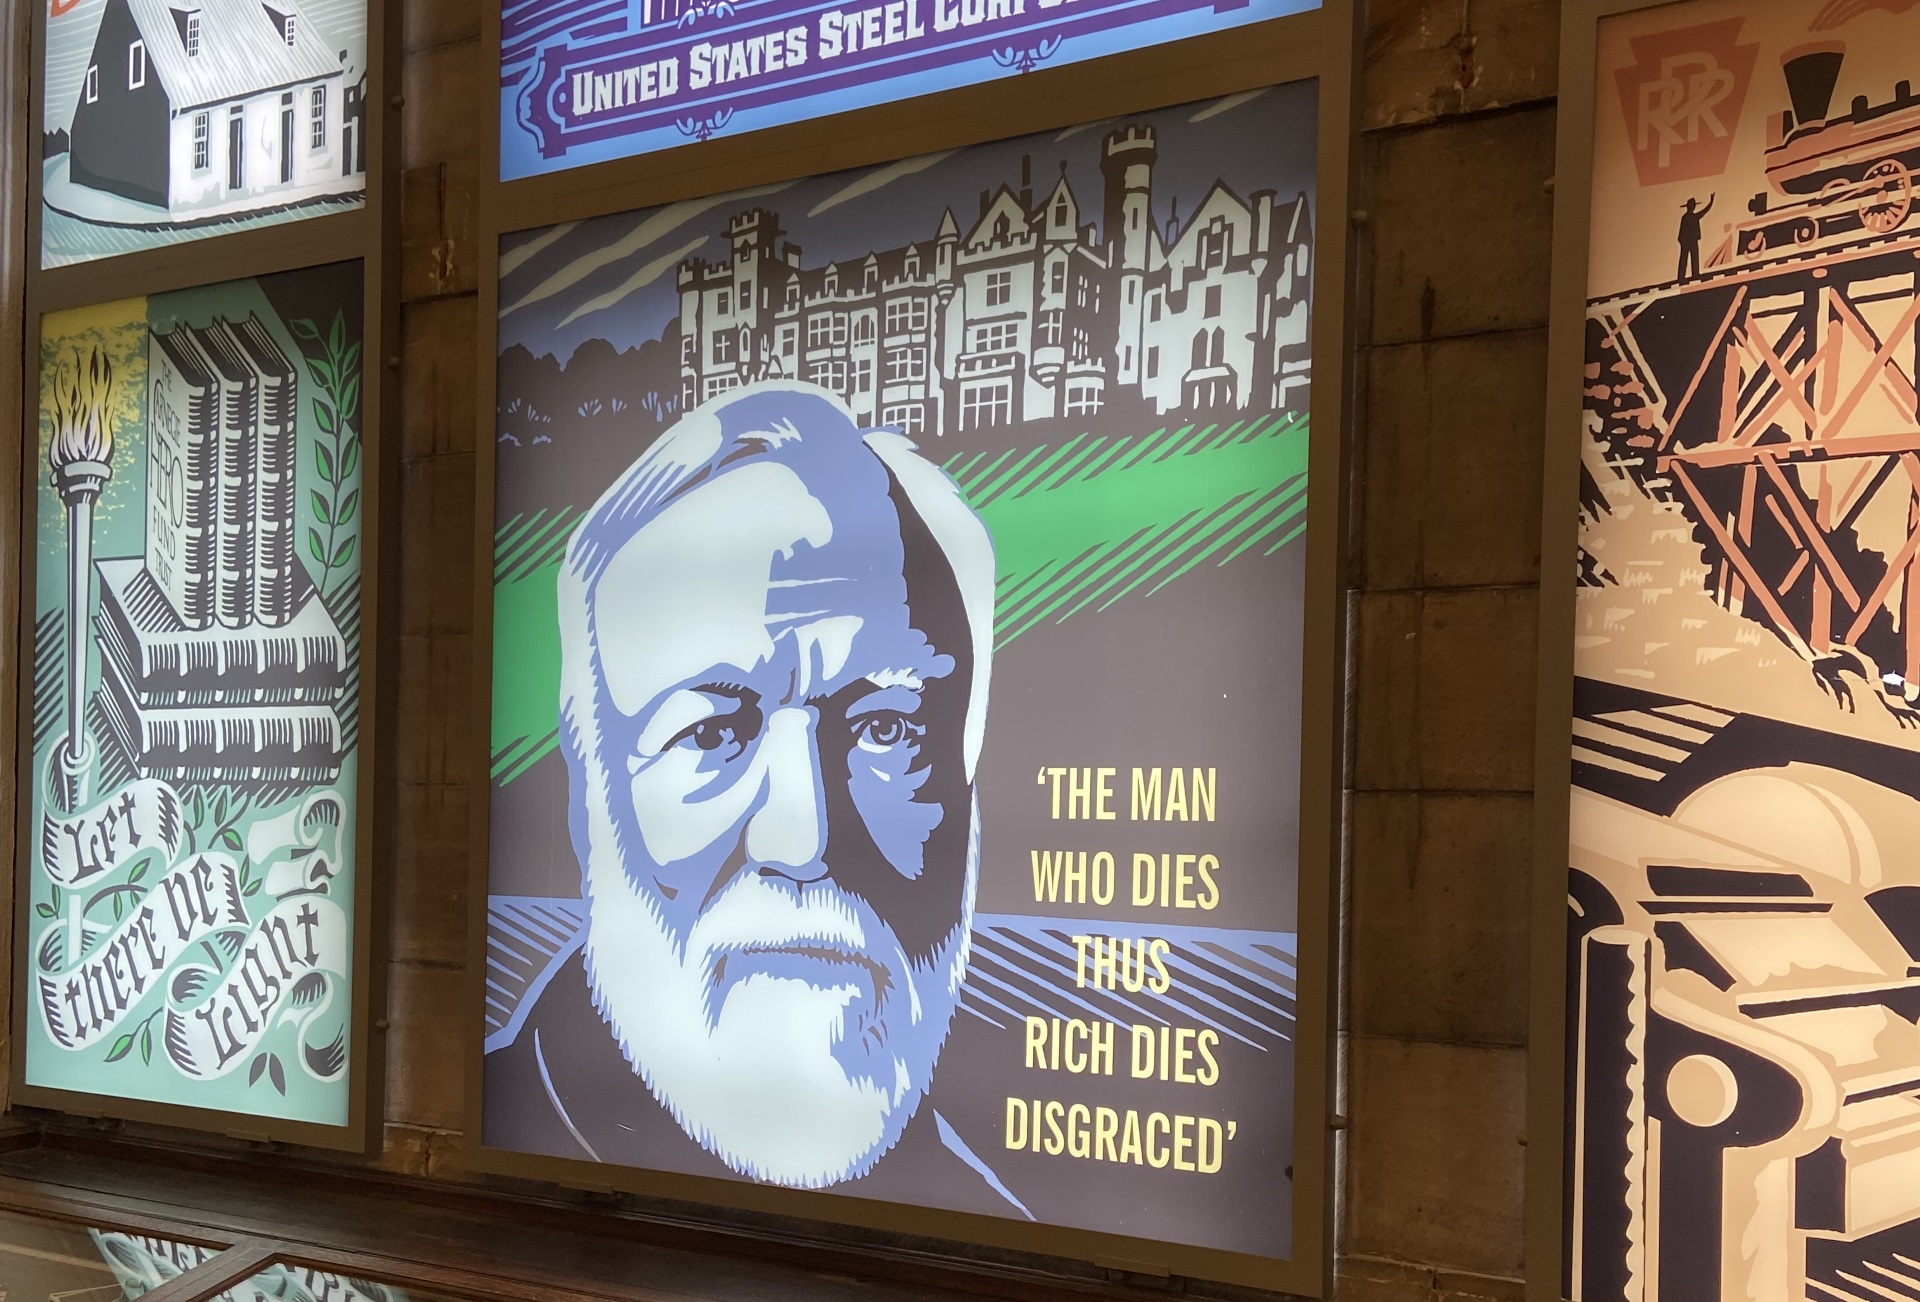 How a Scotsman changed the face of Dunfermline and the world